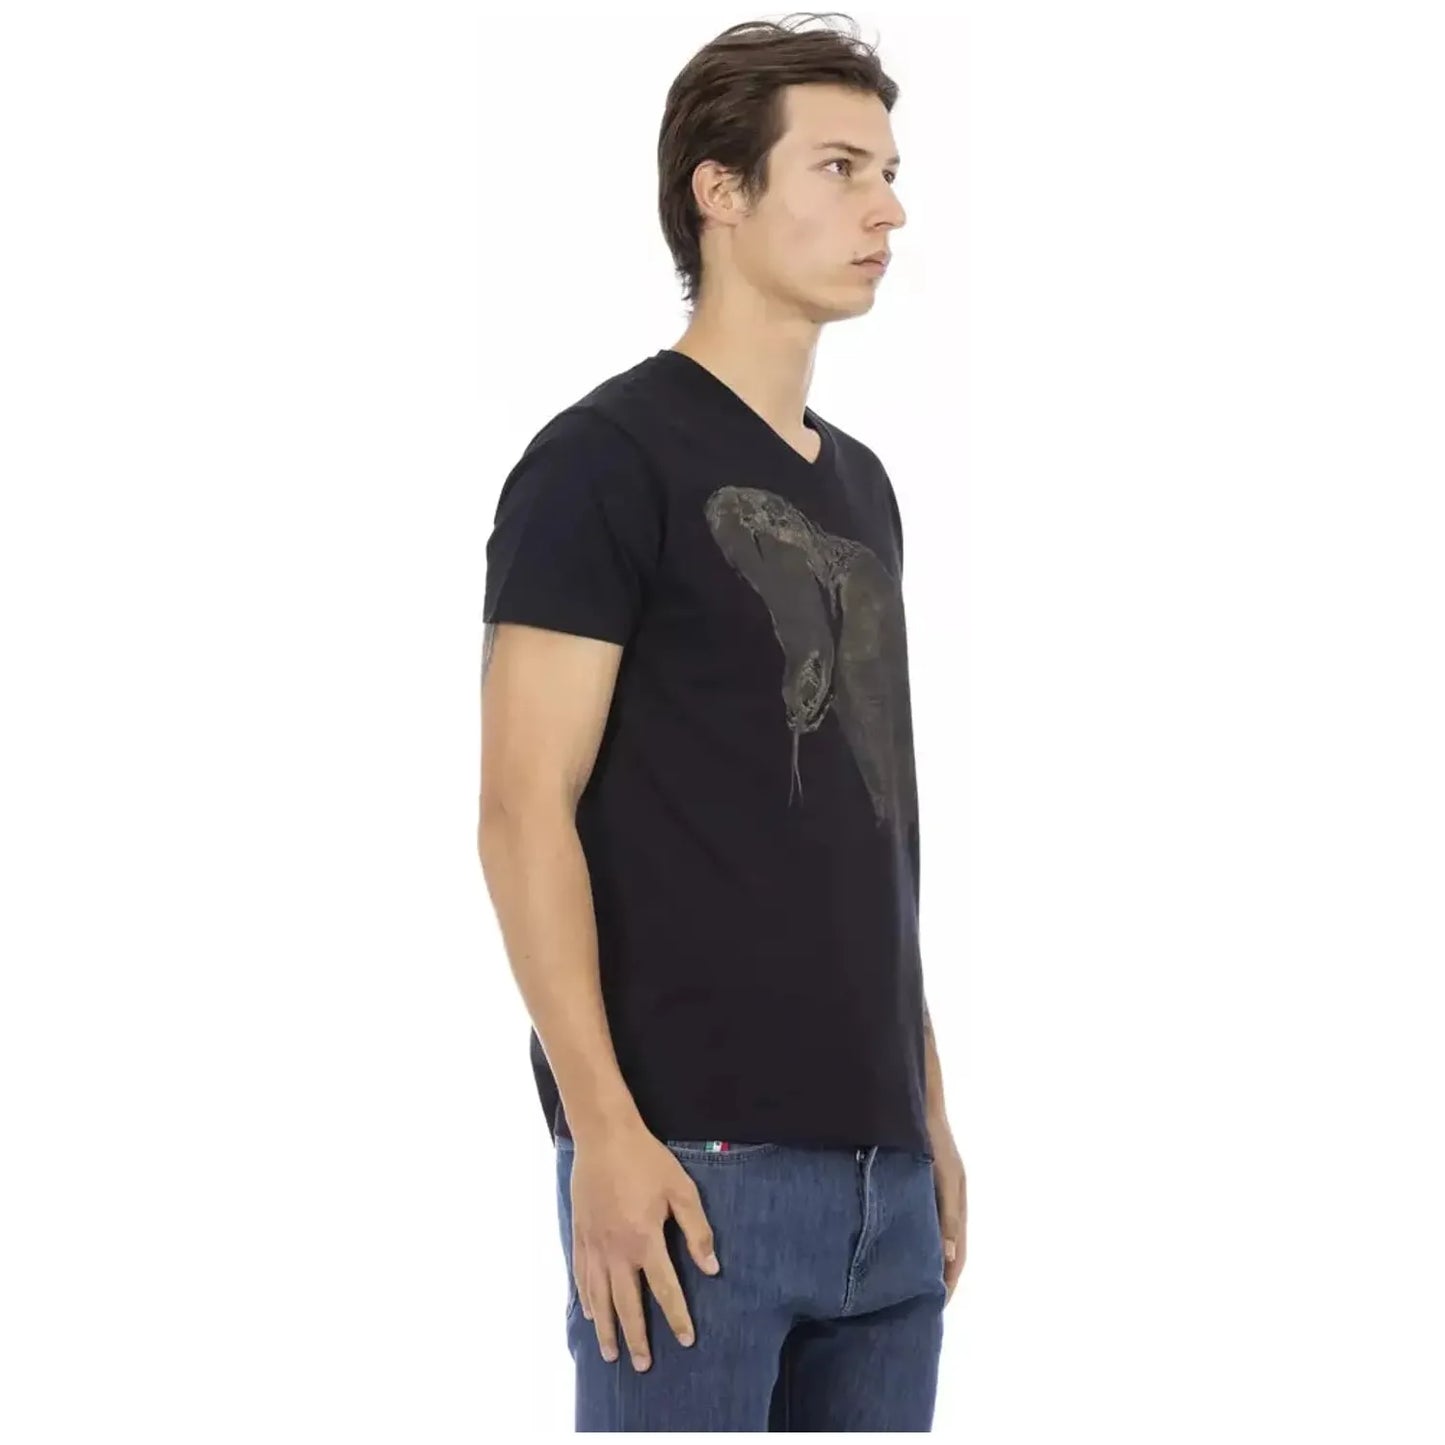 Trussardi Action V-Neck Black Tee with Chic Front Print black-cotton-t-shirt-41